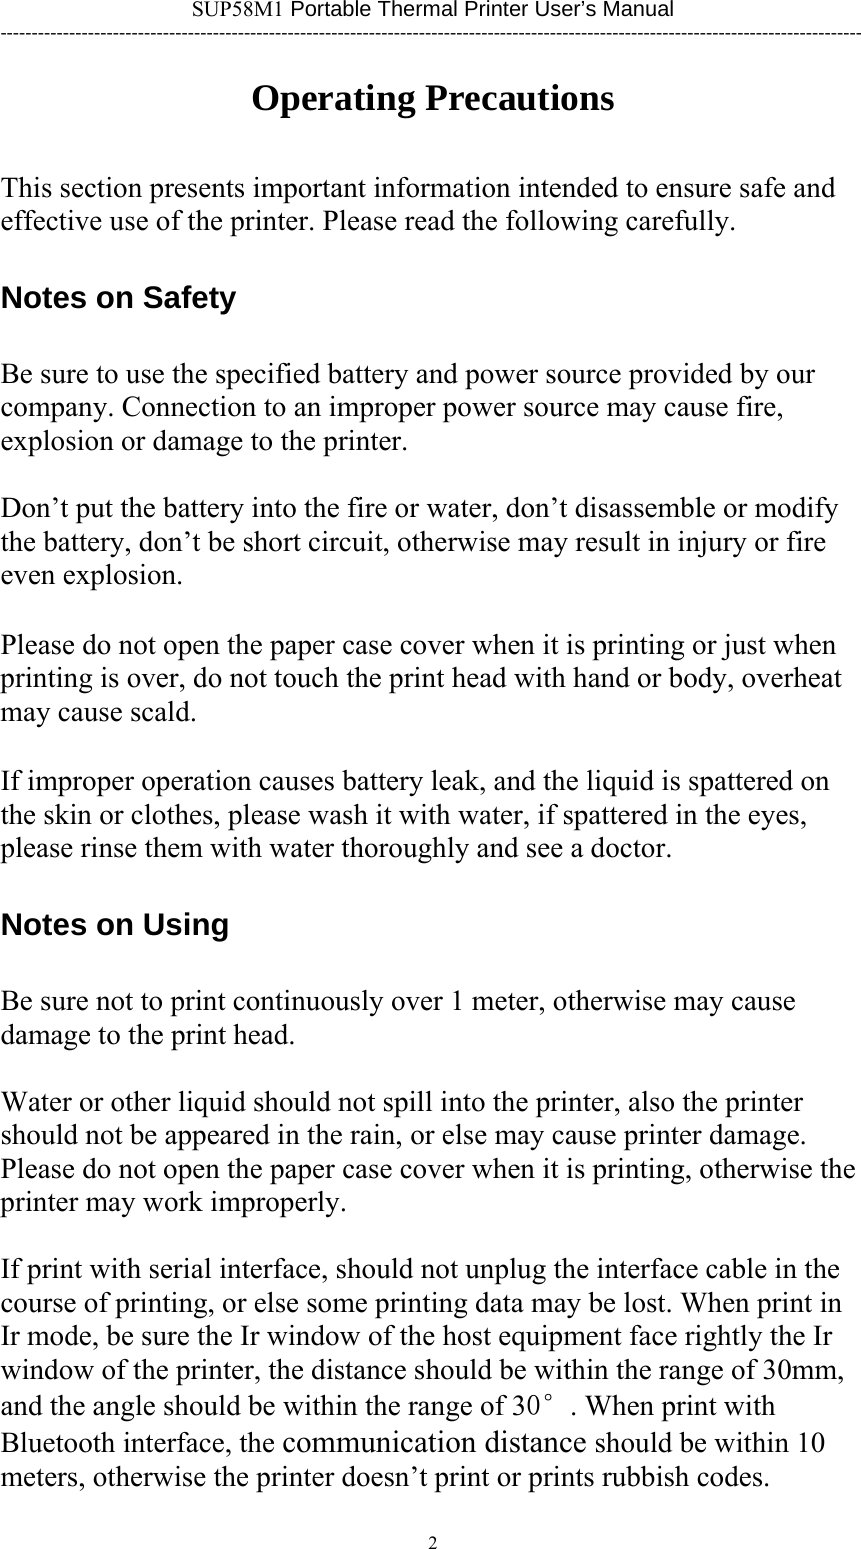 SUP58M1 Portable Thermal Printer User’s Manual ------------------------------------------------------------------------------------------------------------------------------------------ Operating Precautions This section presents important information intended to ensure safe and effective use of the printer. Please read the following carefully.   Notes on Safety Be sure to use the specified battery and power source provided by our company. Connection to an improper power source may cause fire, explosion or damage to the printer.  Don’t put the battery into the fire or water, don’t disassemble or modify the battery, don’t be short circuit, otherwise may result in injury or fire even explosion.  Please do not open the paper case cover when it is printing or just when printing is over, do not touch the print head with hand or body, overheat may cause scald.  If improper operation causes battery leak, and the liquid is spattered on the skin or clothes, please wash it with water, if spattered in the eyes, please rinse them with water thoroughly and see a doctor. Notes on Using Be sure not to print continuously over 1 meter, otherwise may cause damage to the print head.  Water or other liquid should not spill into the printer, also the printer should not be appeared in the rain, or else may cause printer damage. Please do not open the paper case cover when it is printing, otherwise the printer may work improperly.  If print with serial interface, should not unplug the interface cable in the course of printing, or else some printing data may be lost. When print in Ir mode, be sure the Ir window of the host equipment face rightly the Ir window of the printer, the distance should be within the range of 30mm, and the angle should be within the range of 30°. When print with Bluetooth interface, the communication distance should be within 10 meters, otherwise the printer doesn’t print or prints rubbish codes. 2      